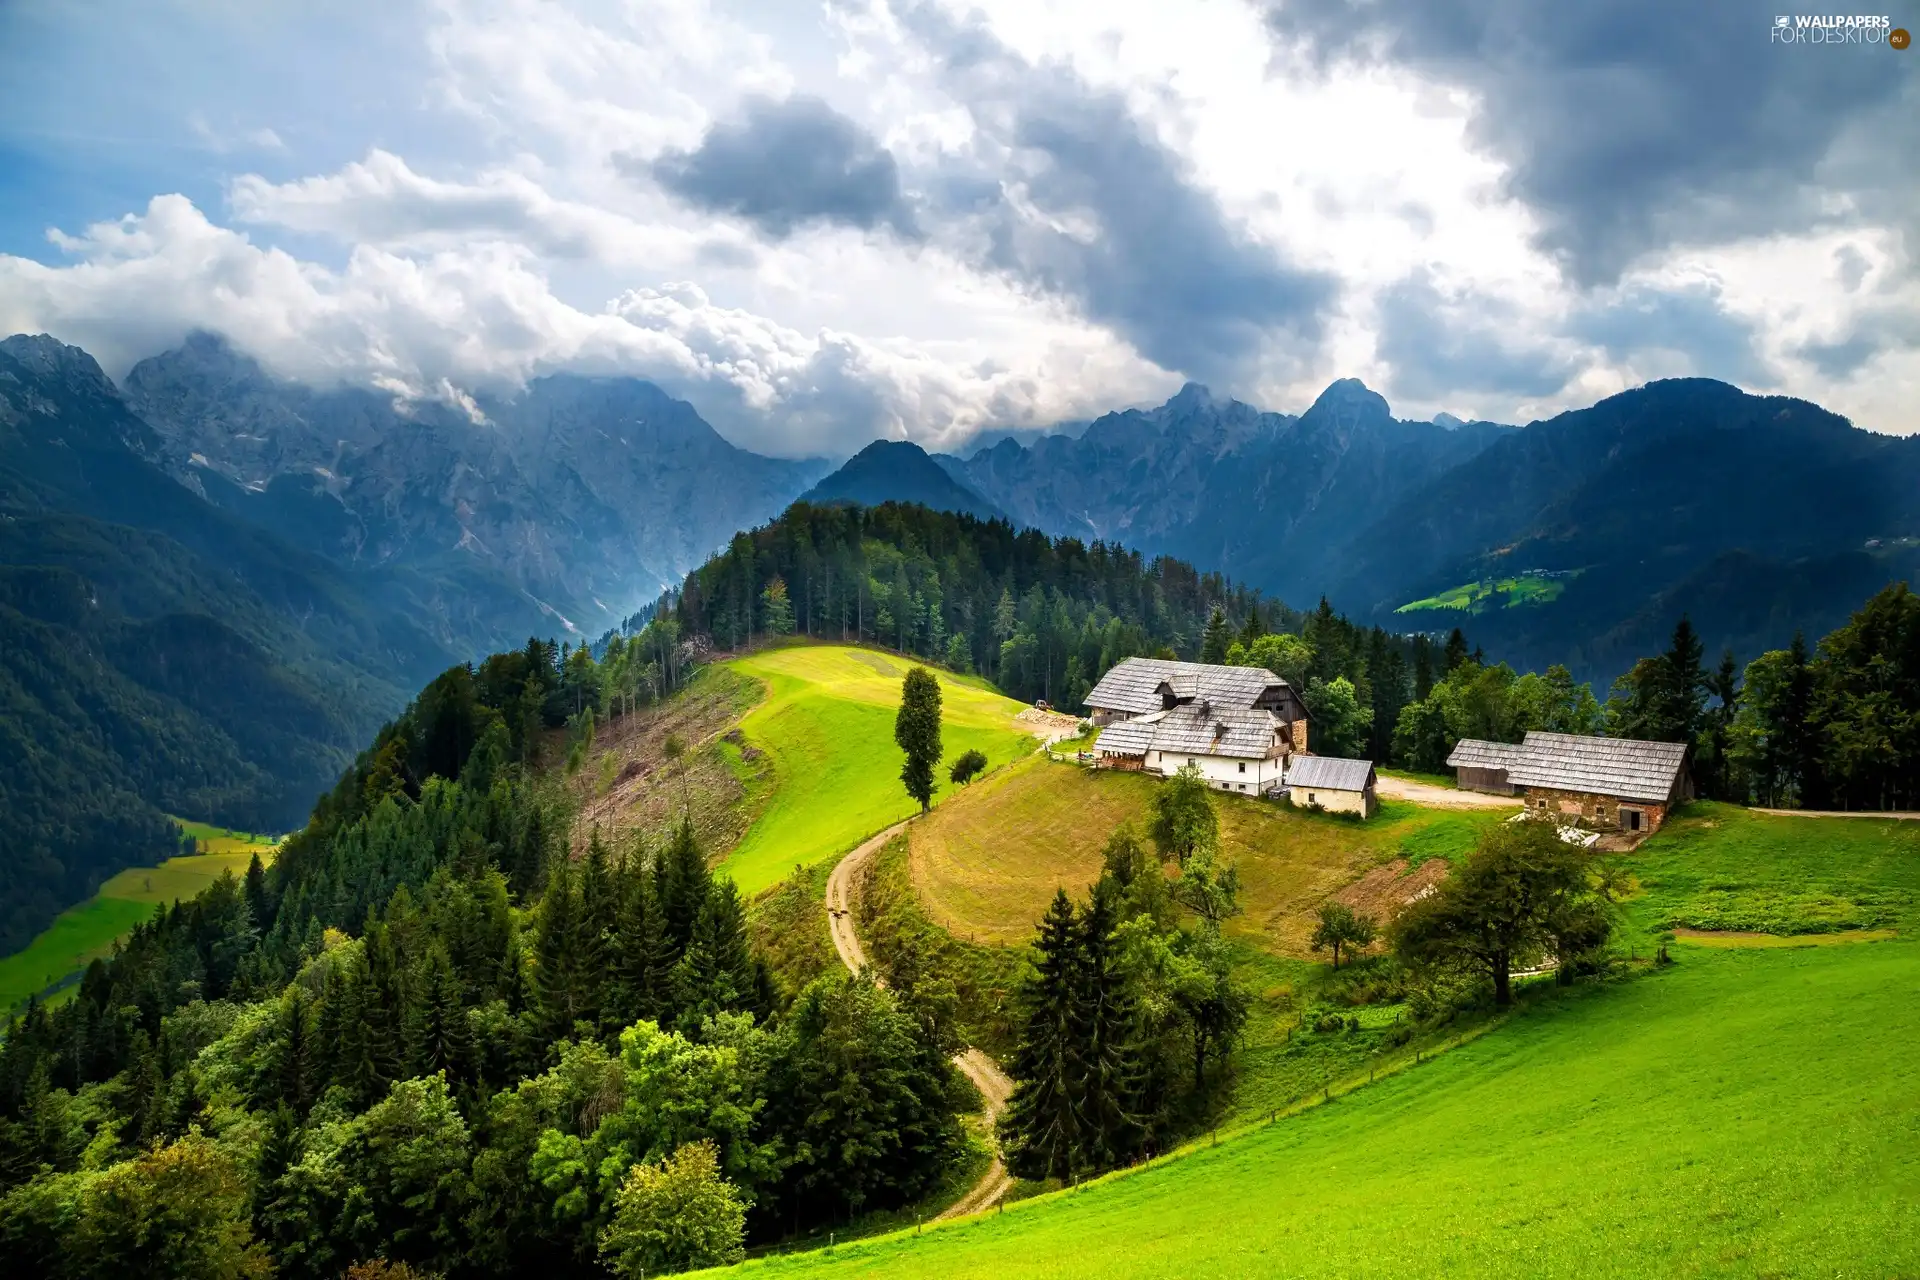 car in the meadow, Houses, Mountains, woods, clouds